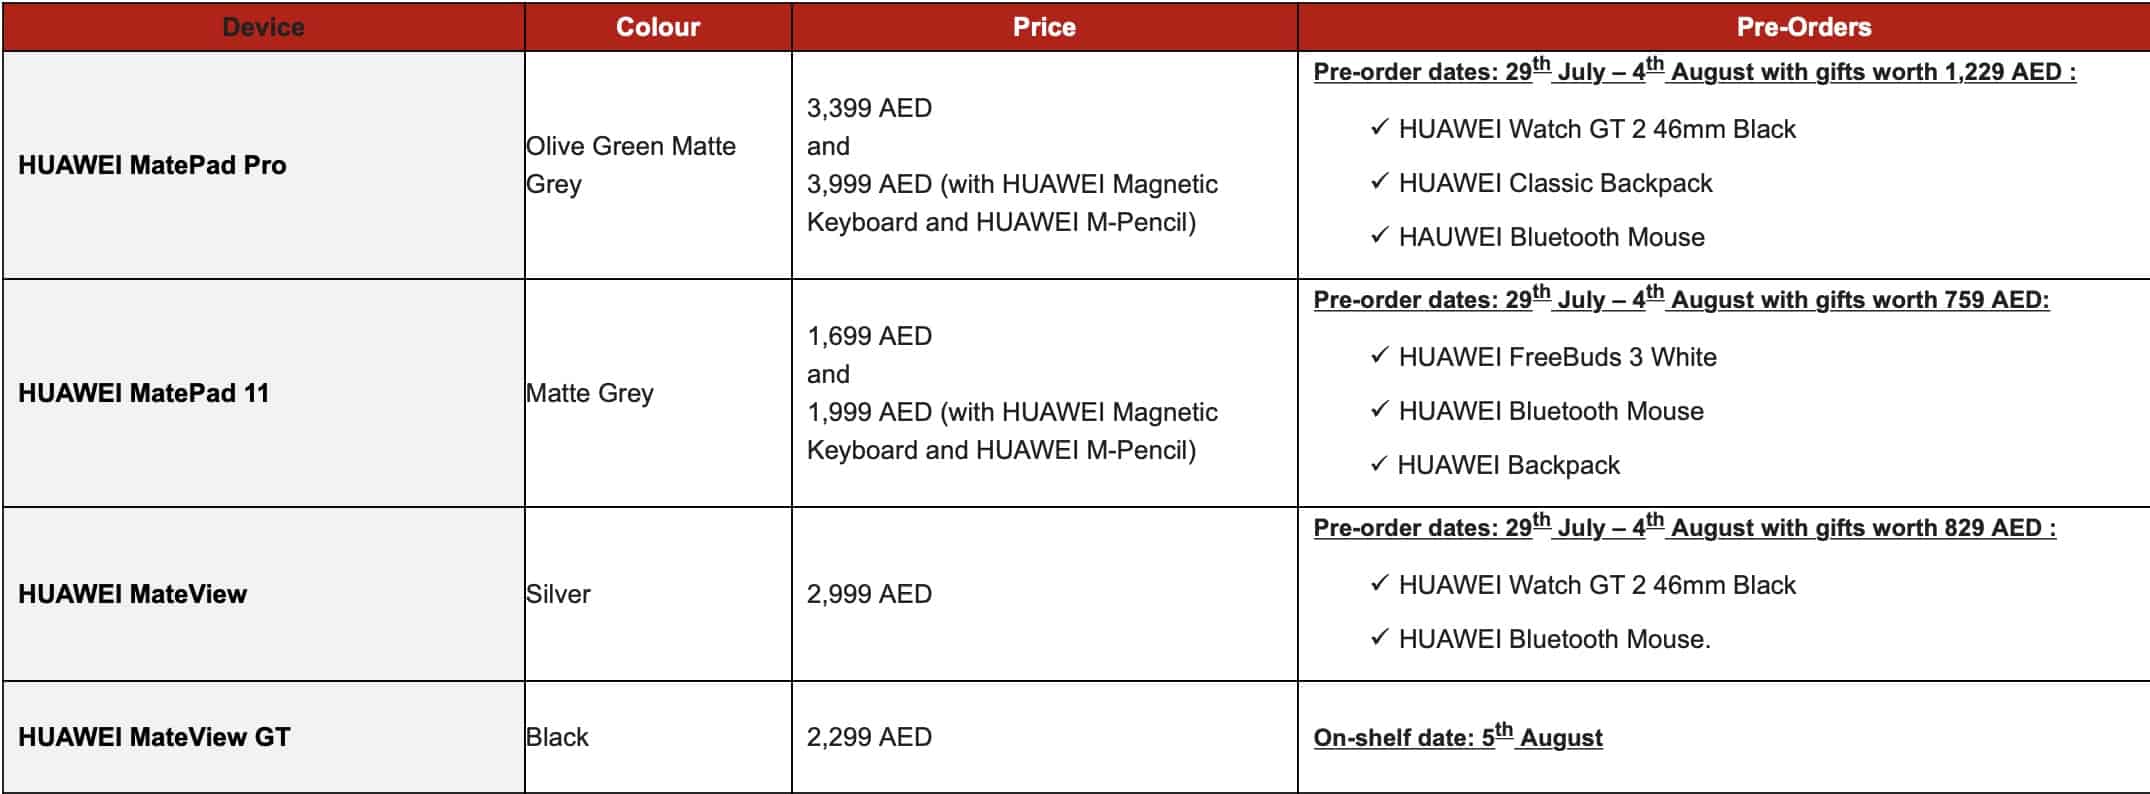 Huawei breaks through with the all-new Super Device experience announced in the UAE